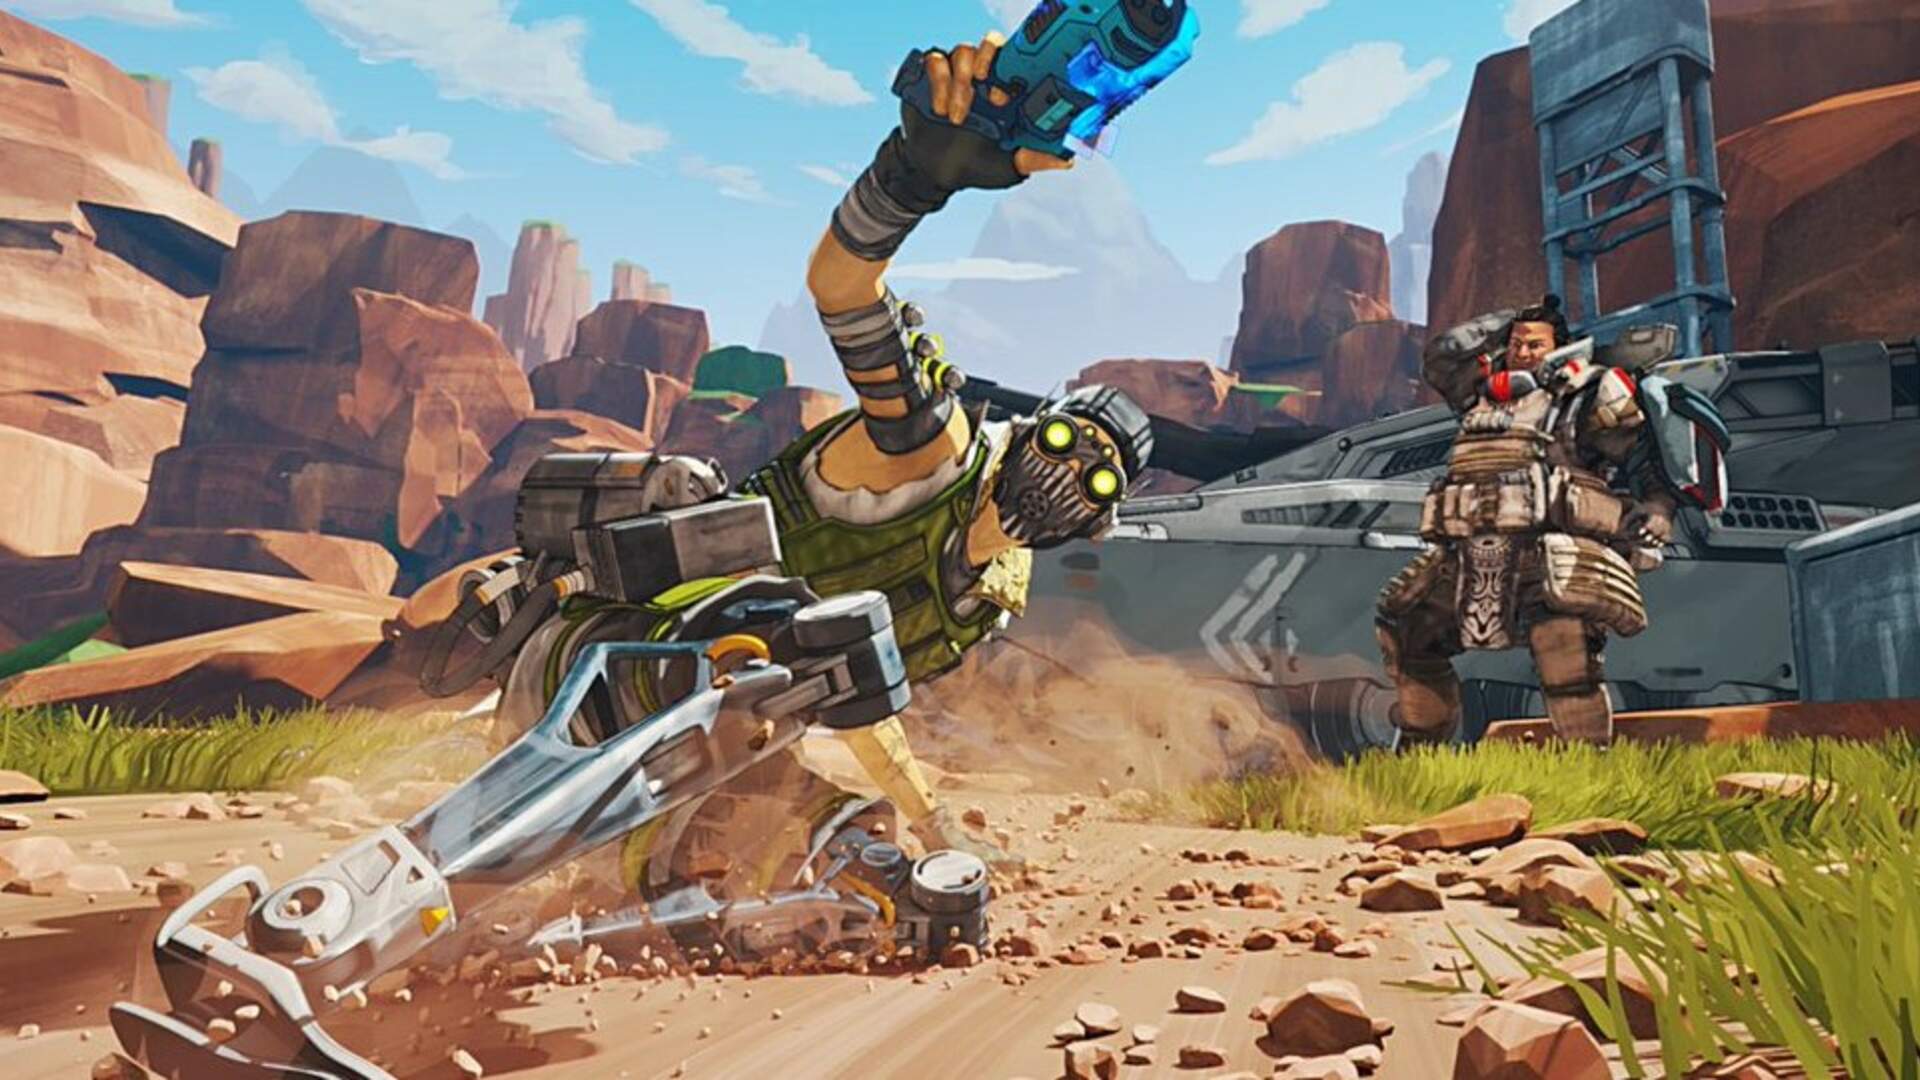 How to dominate in Apex Legends – tips from the top players